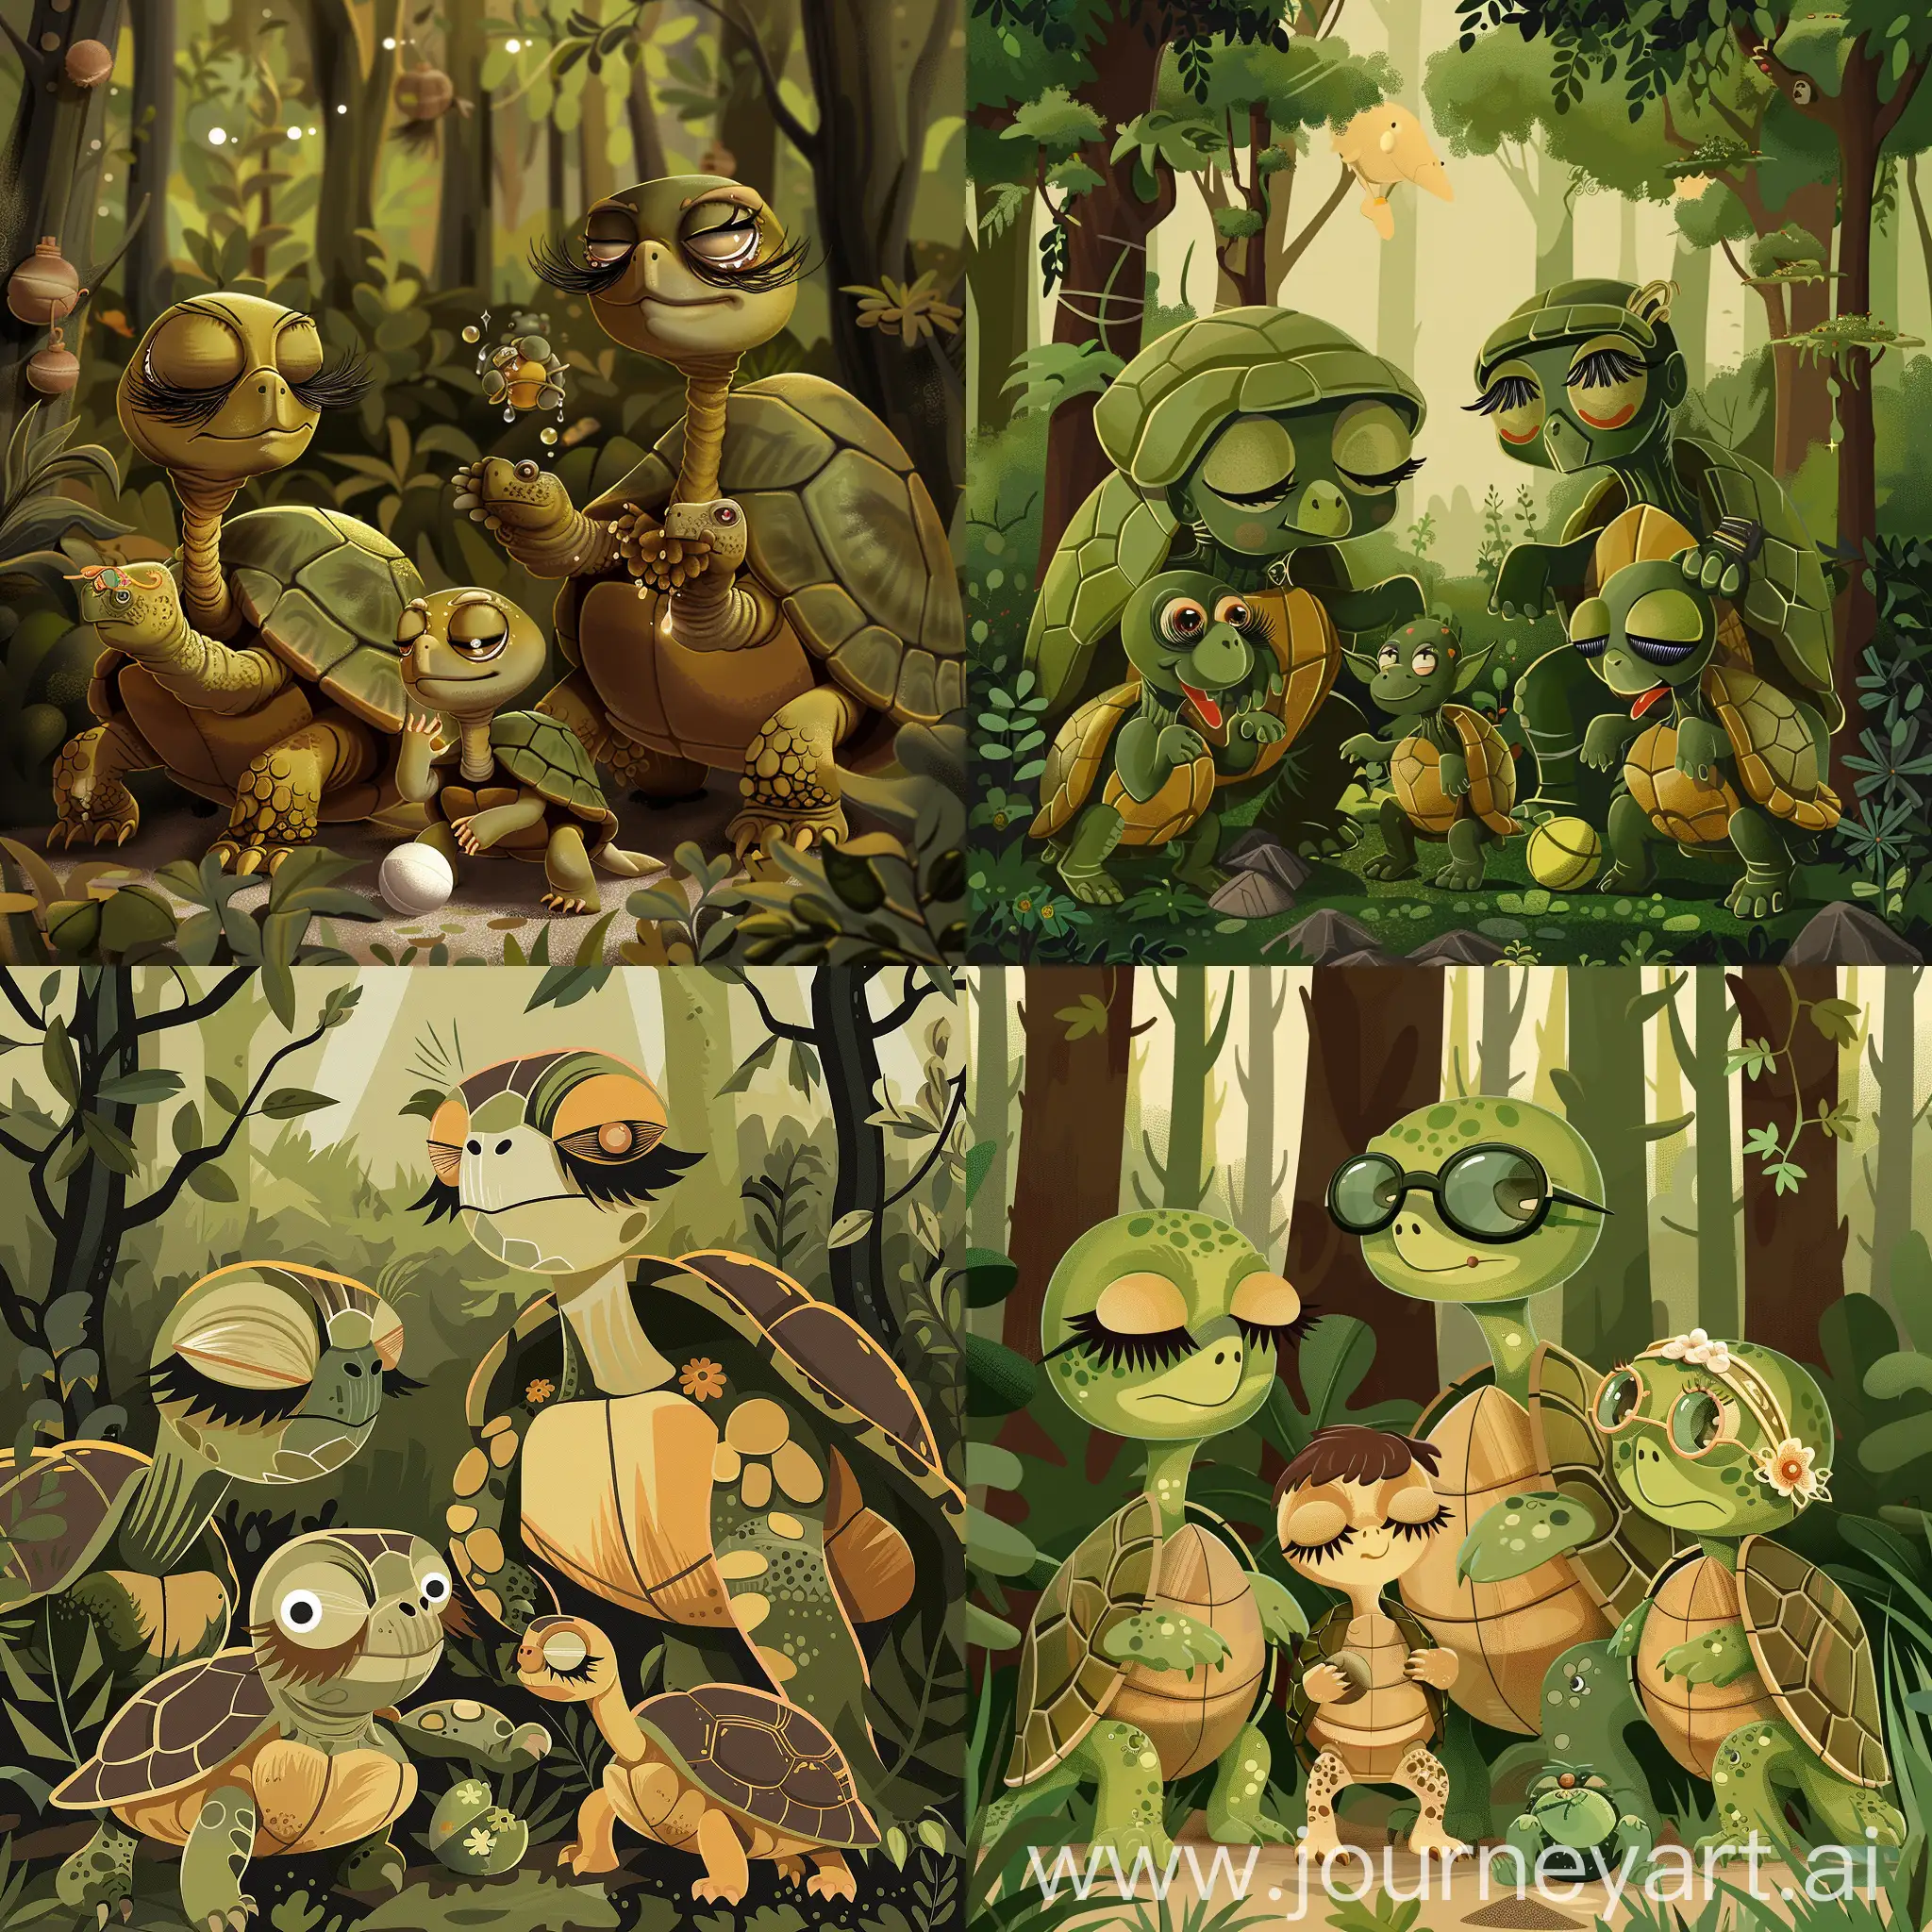 a family of four turtles in the forest, the father turtle with a distinguishable masculine feature, the mother turtle adorned with eyelashes and feminine makeup, the son turtle playing with a ball, and the daughter turtle resembling her mother with eyelashes and makeup, high attention to detail, high creativity, 8k quality, simple vector, fantasy style